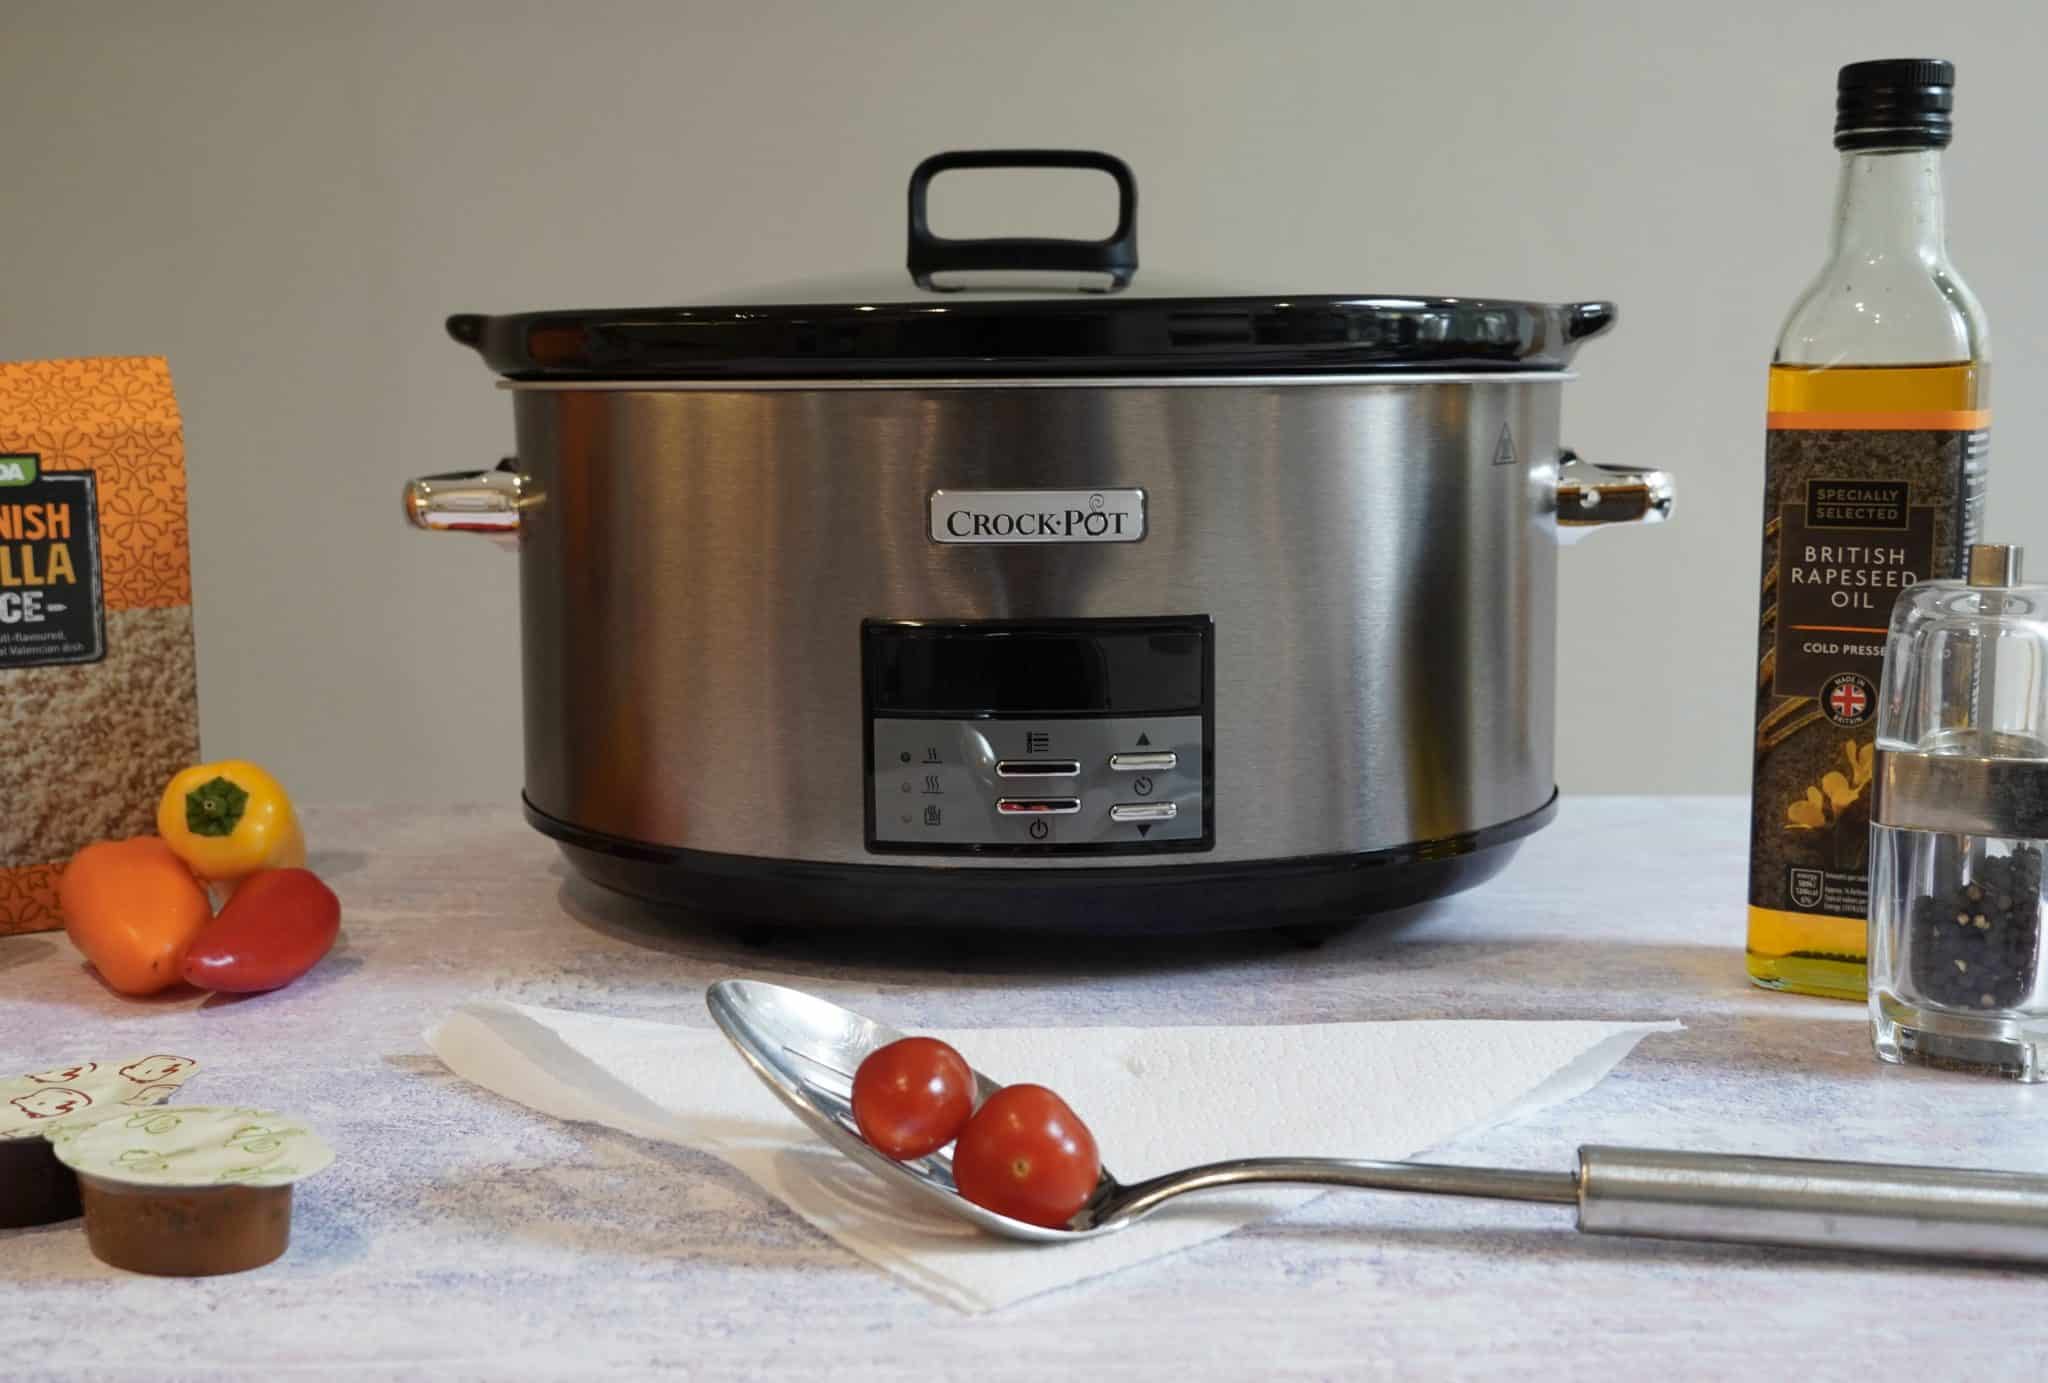 Can You Boil Water in a Crock Pot?